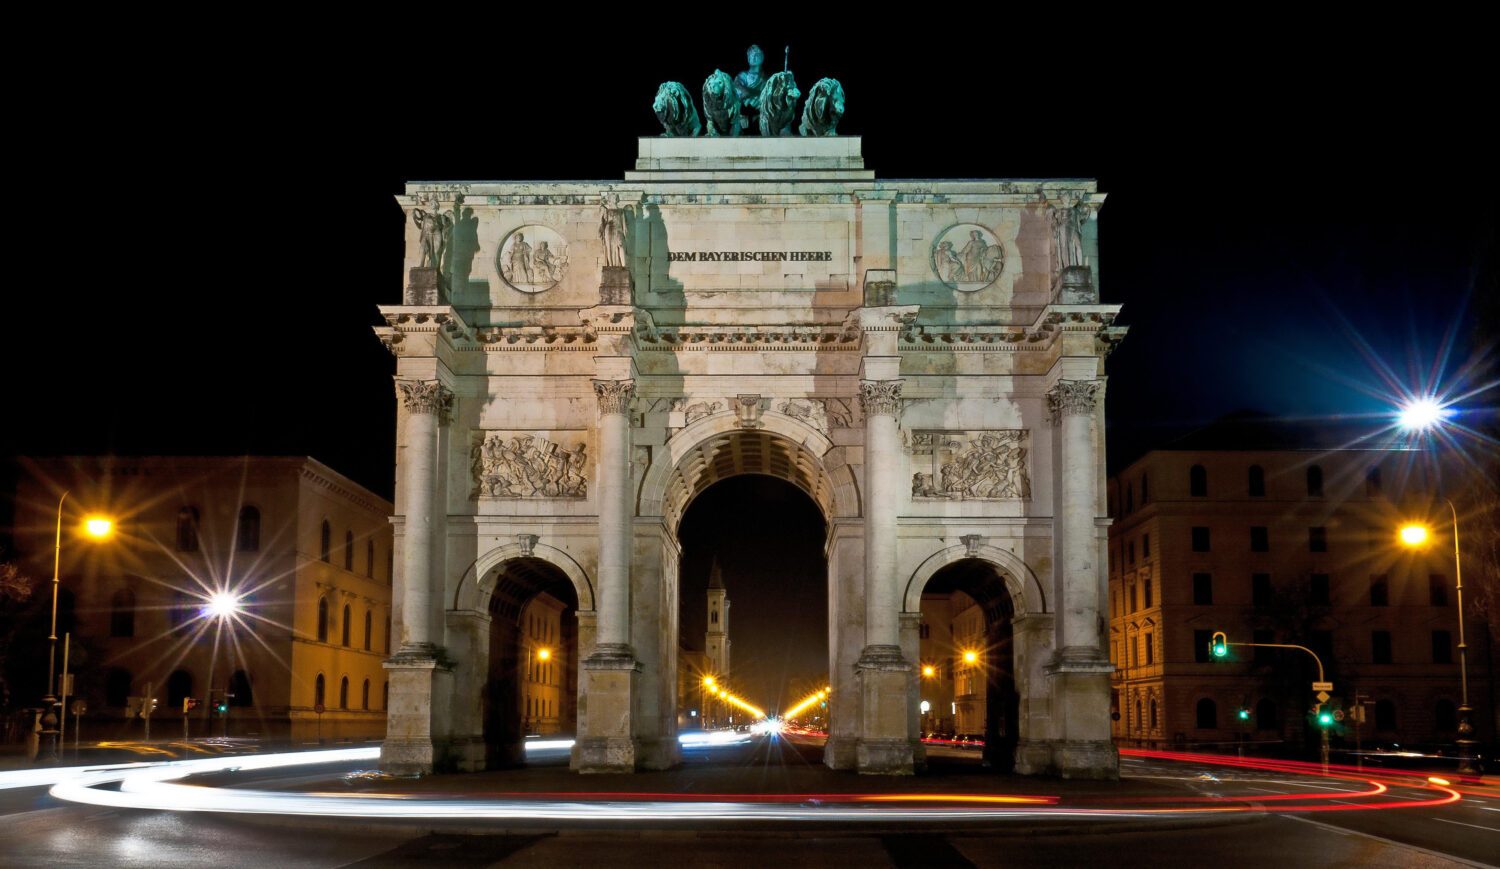 Thanks to a long exposure, you can photograph light streaks from cars and impressively set the scene for a landmark like the Siegestor in Munich